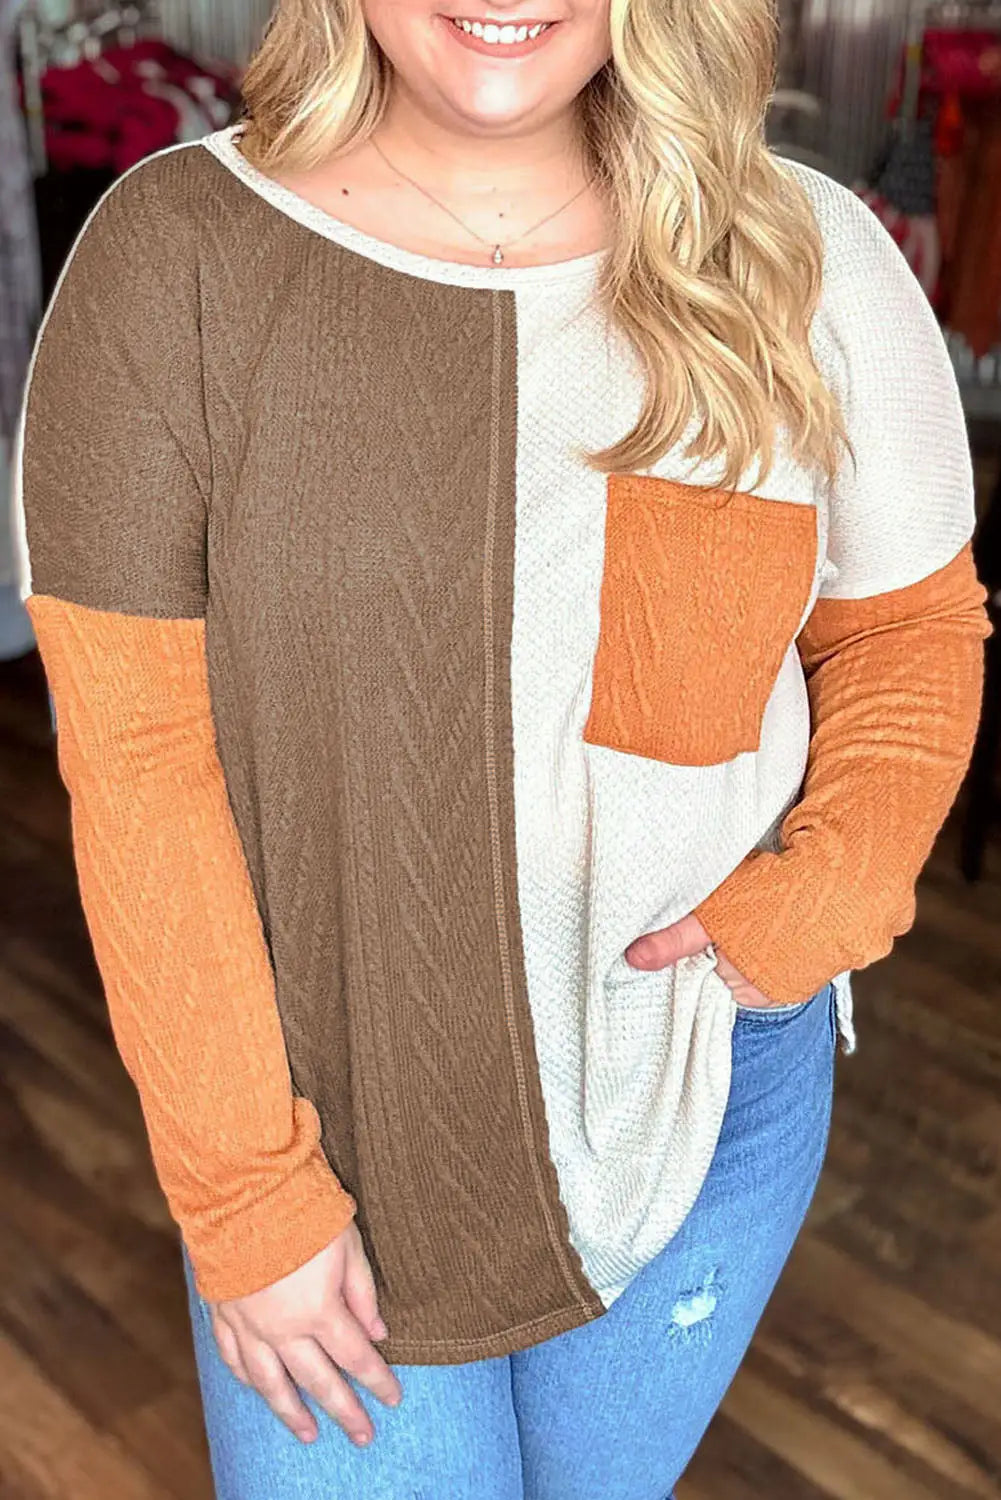 Chestnut plus size color block textured patchwork top with pocket - 1x / 75% polyester + 20% viscose + 5% elastane